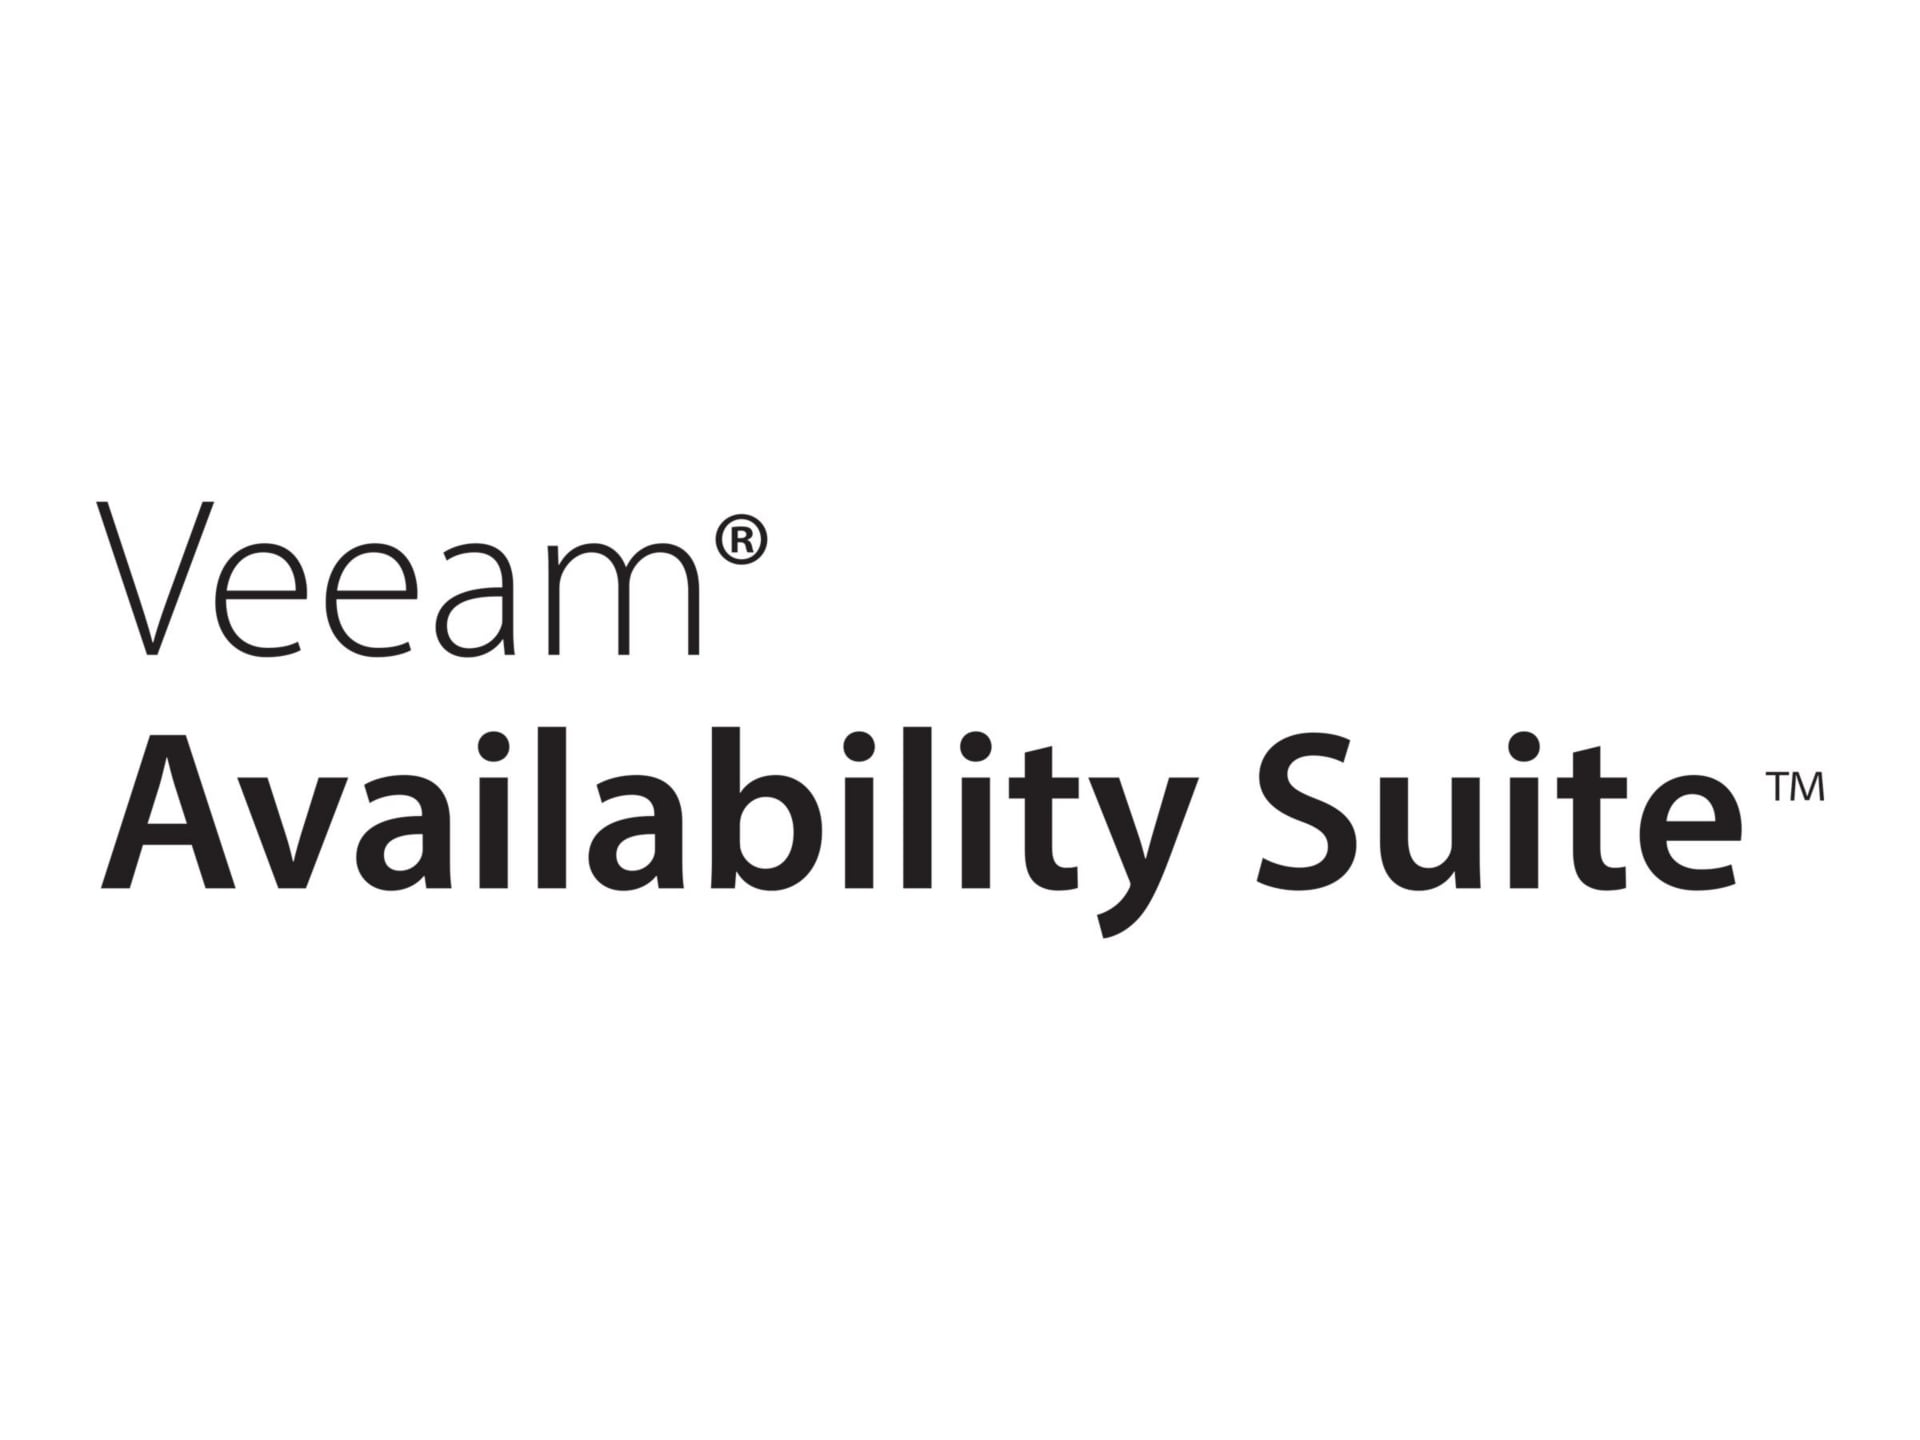 Veeam Availability Suite Universal License - Annual Billing License (renewal) (3rd year) + Production Support - 10